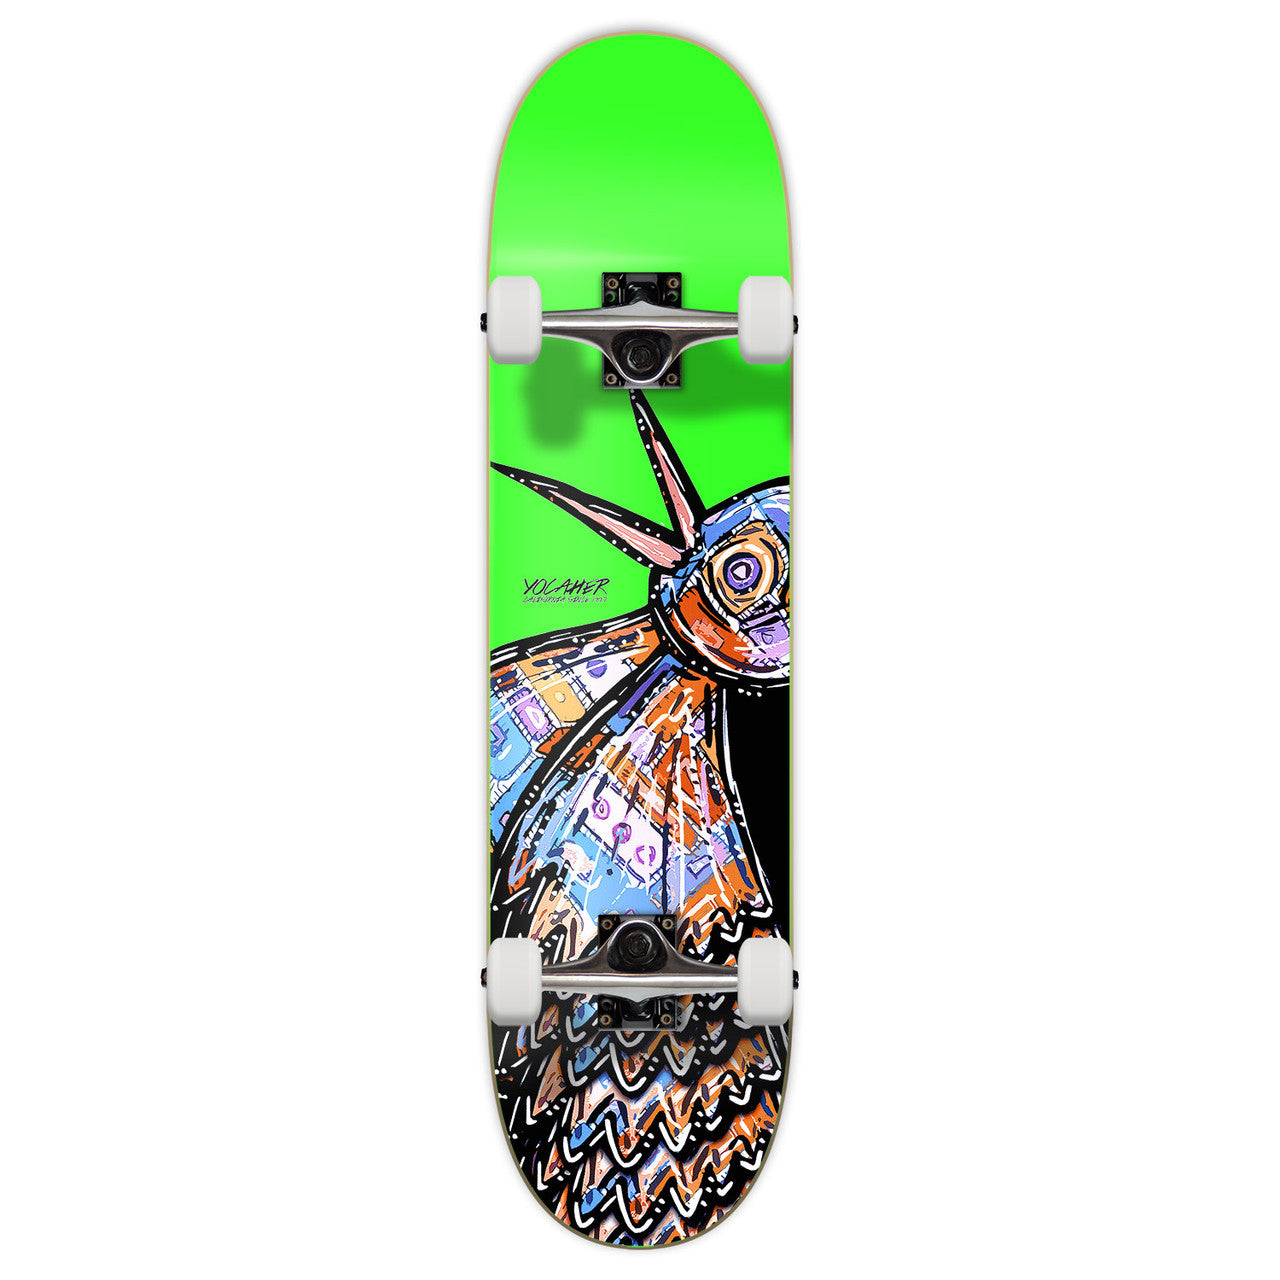 Yocaher Complete Skateboard 7.75" - The Bird Green